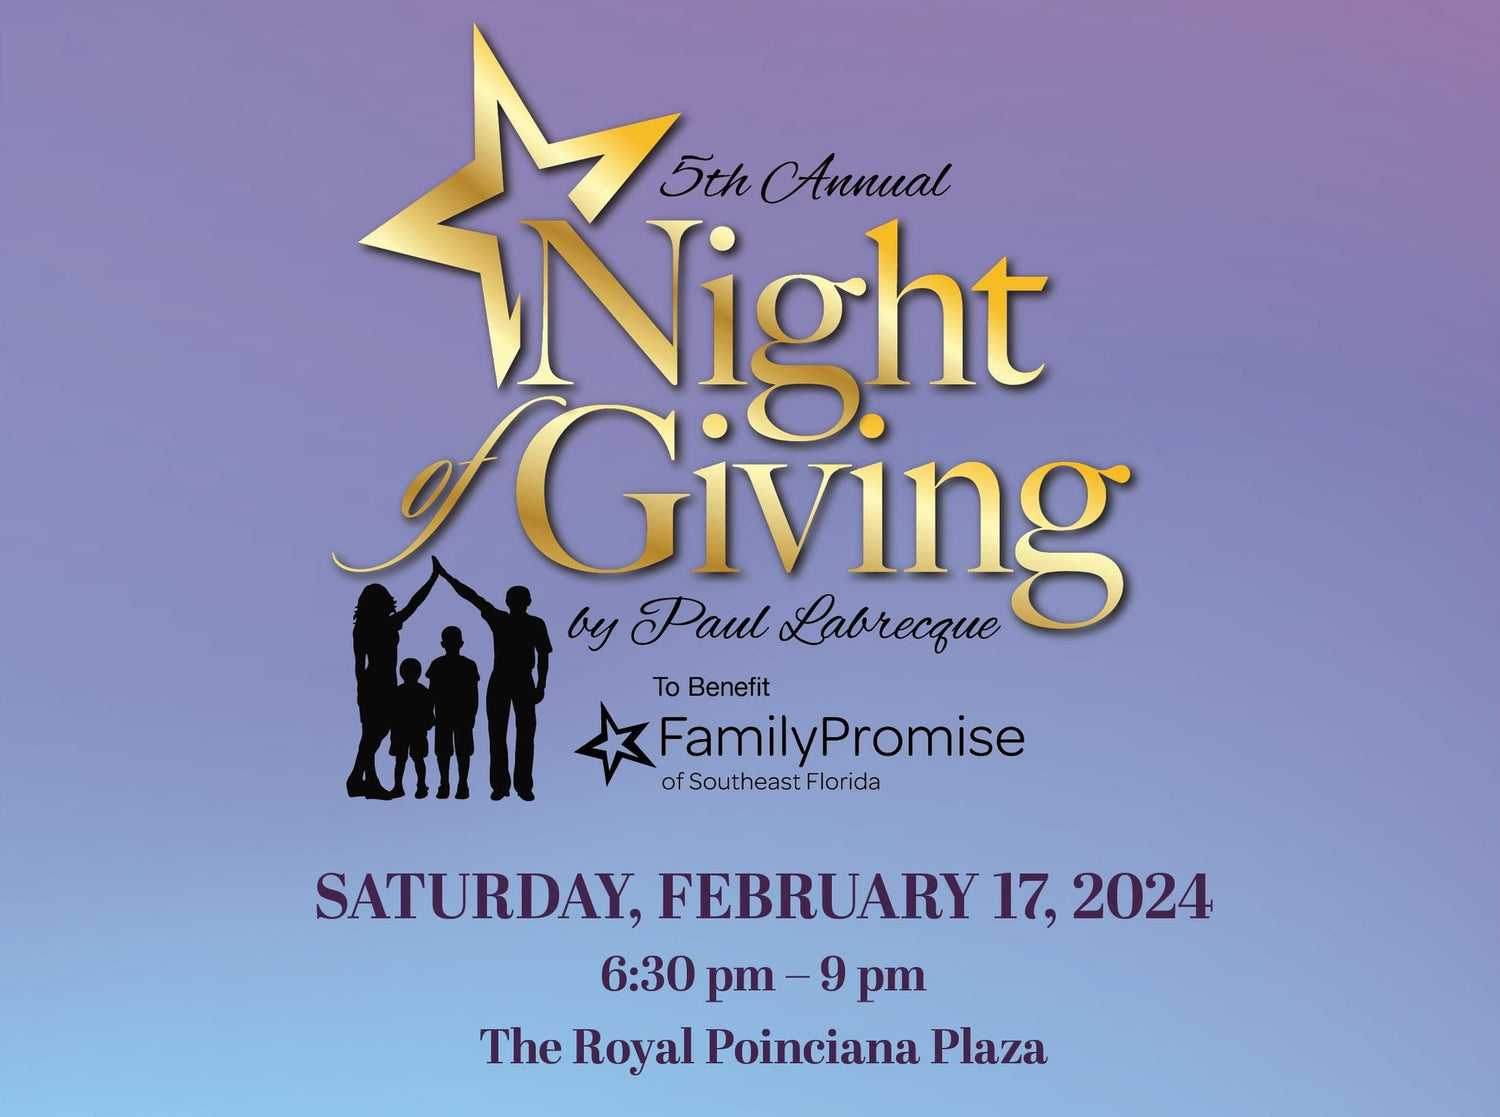 The Palm Beach 5th Annual Night of Giving - Save The Date Saturday, February 17th